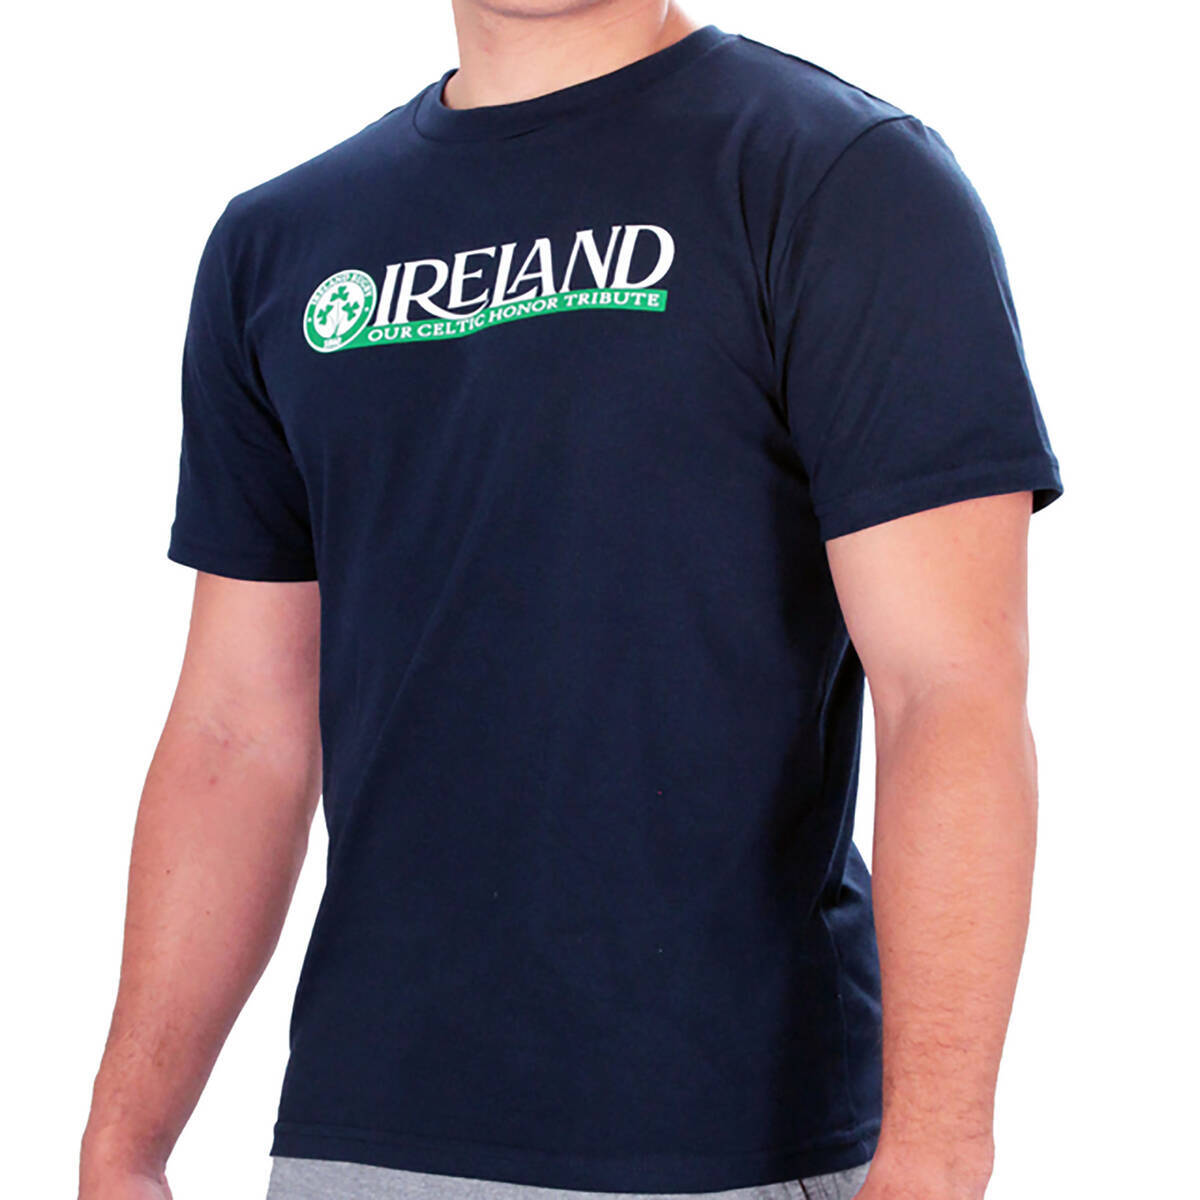 Imagen producto Remera Ireland Our Celtic Honor Tribute  10